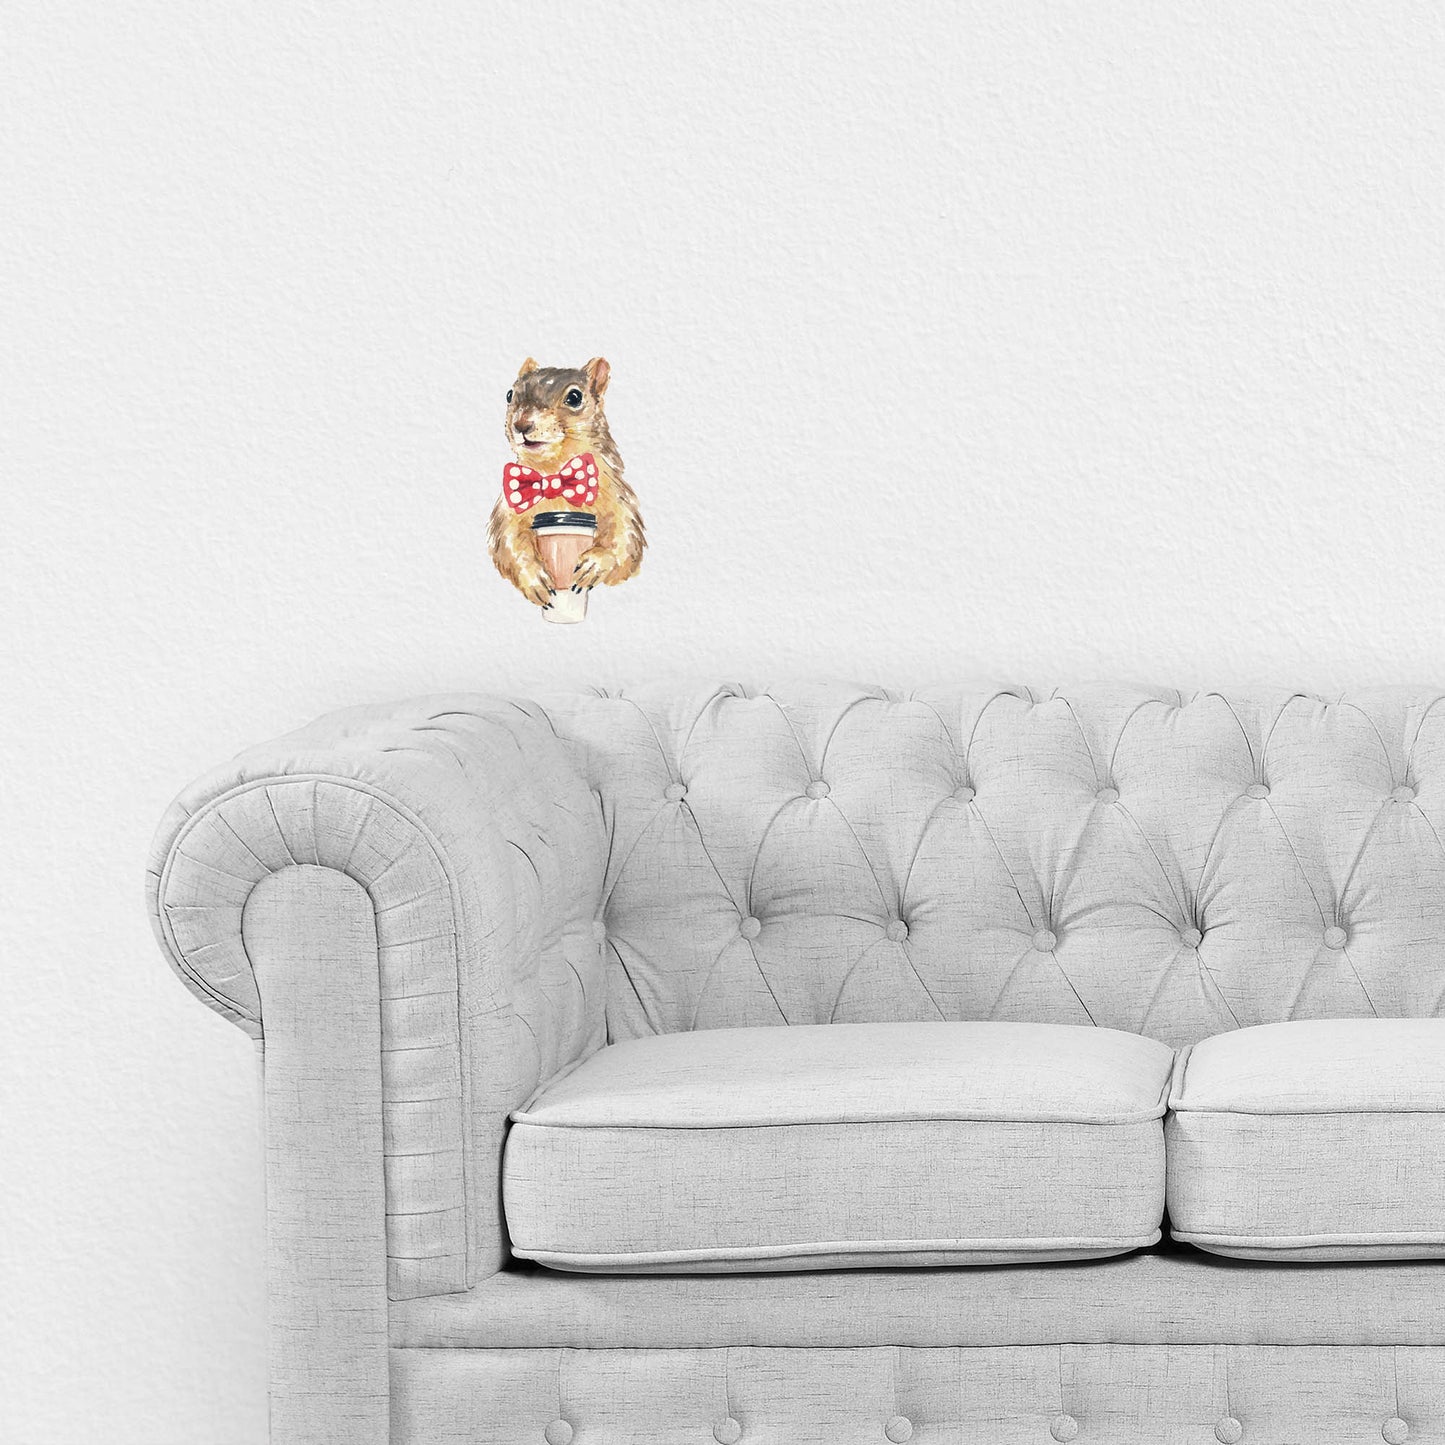 Coffee Squirrel Wall Decal